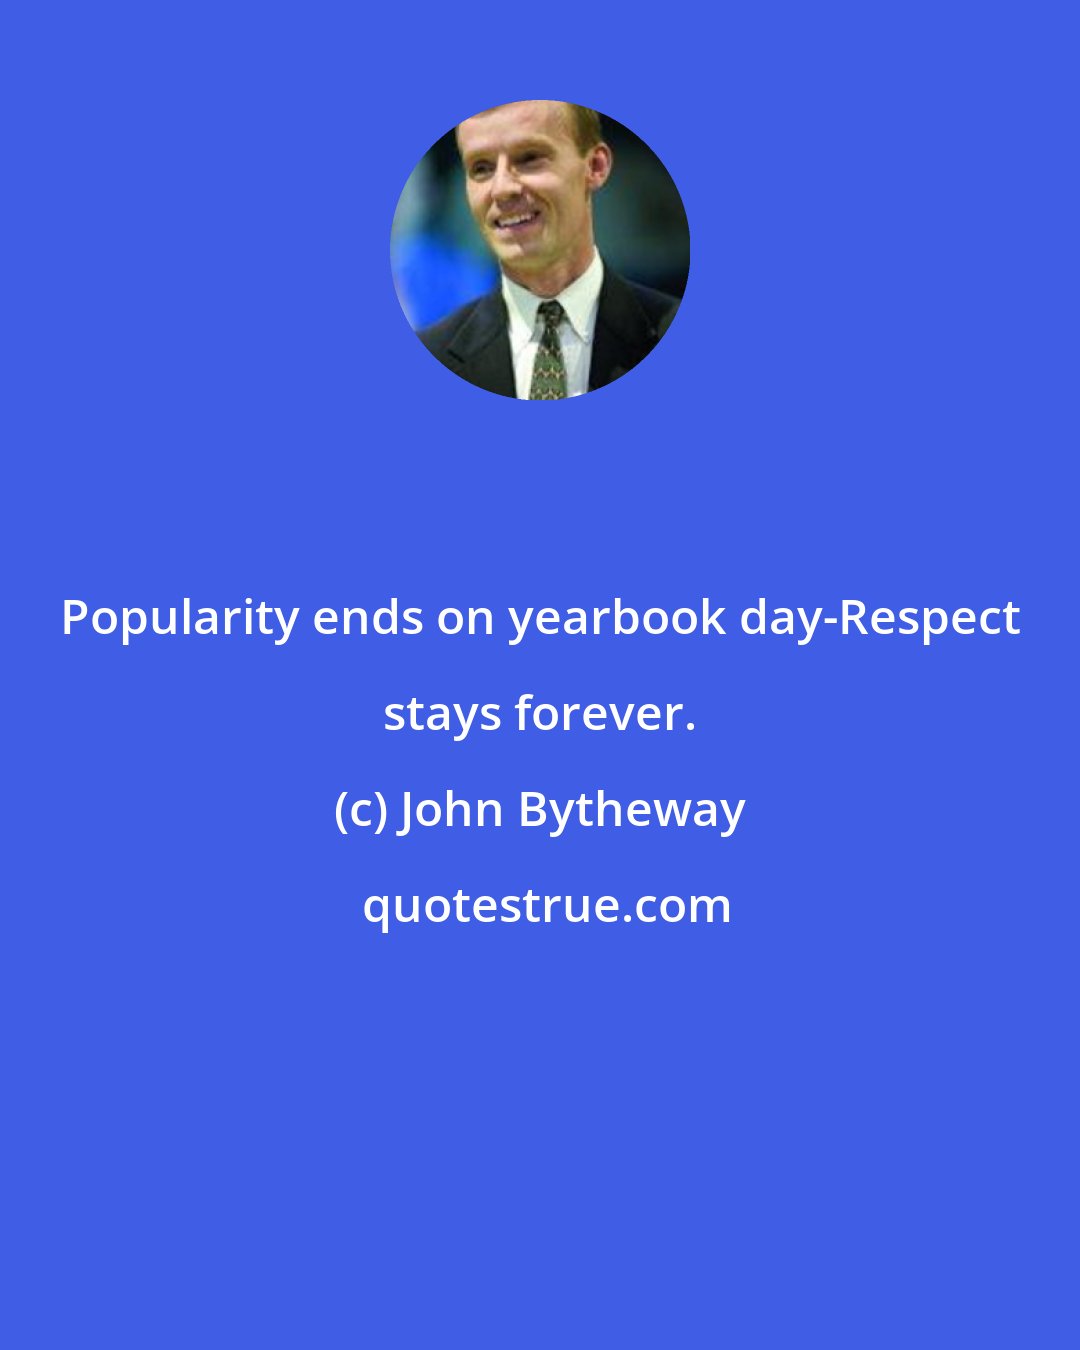 John Bytheway: Popularity ends on yearbook day-Respect stays forever.